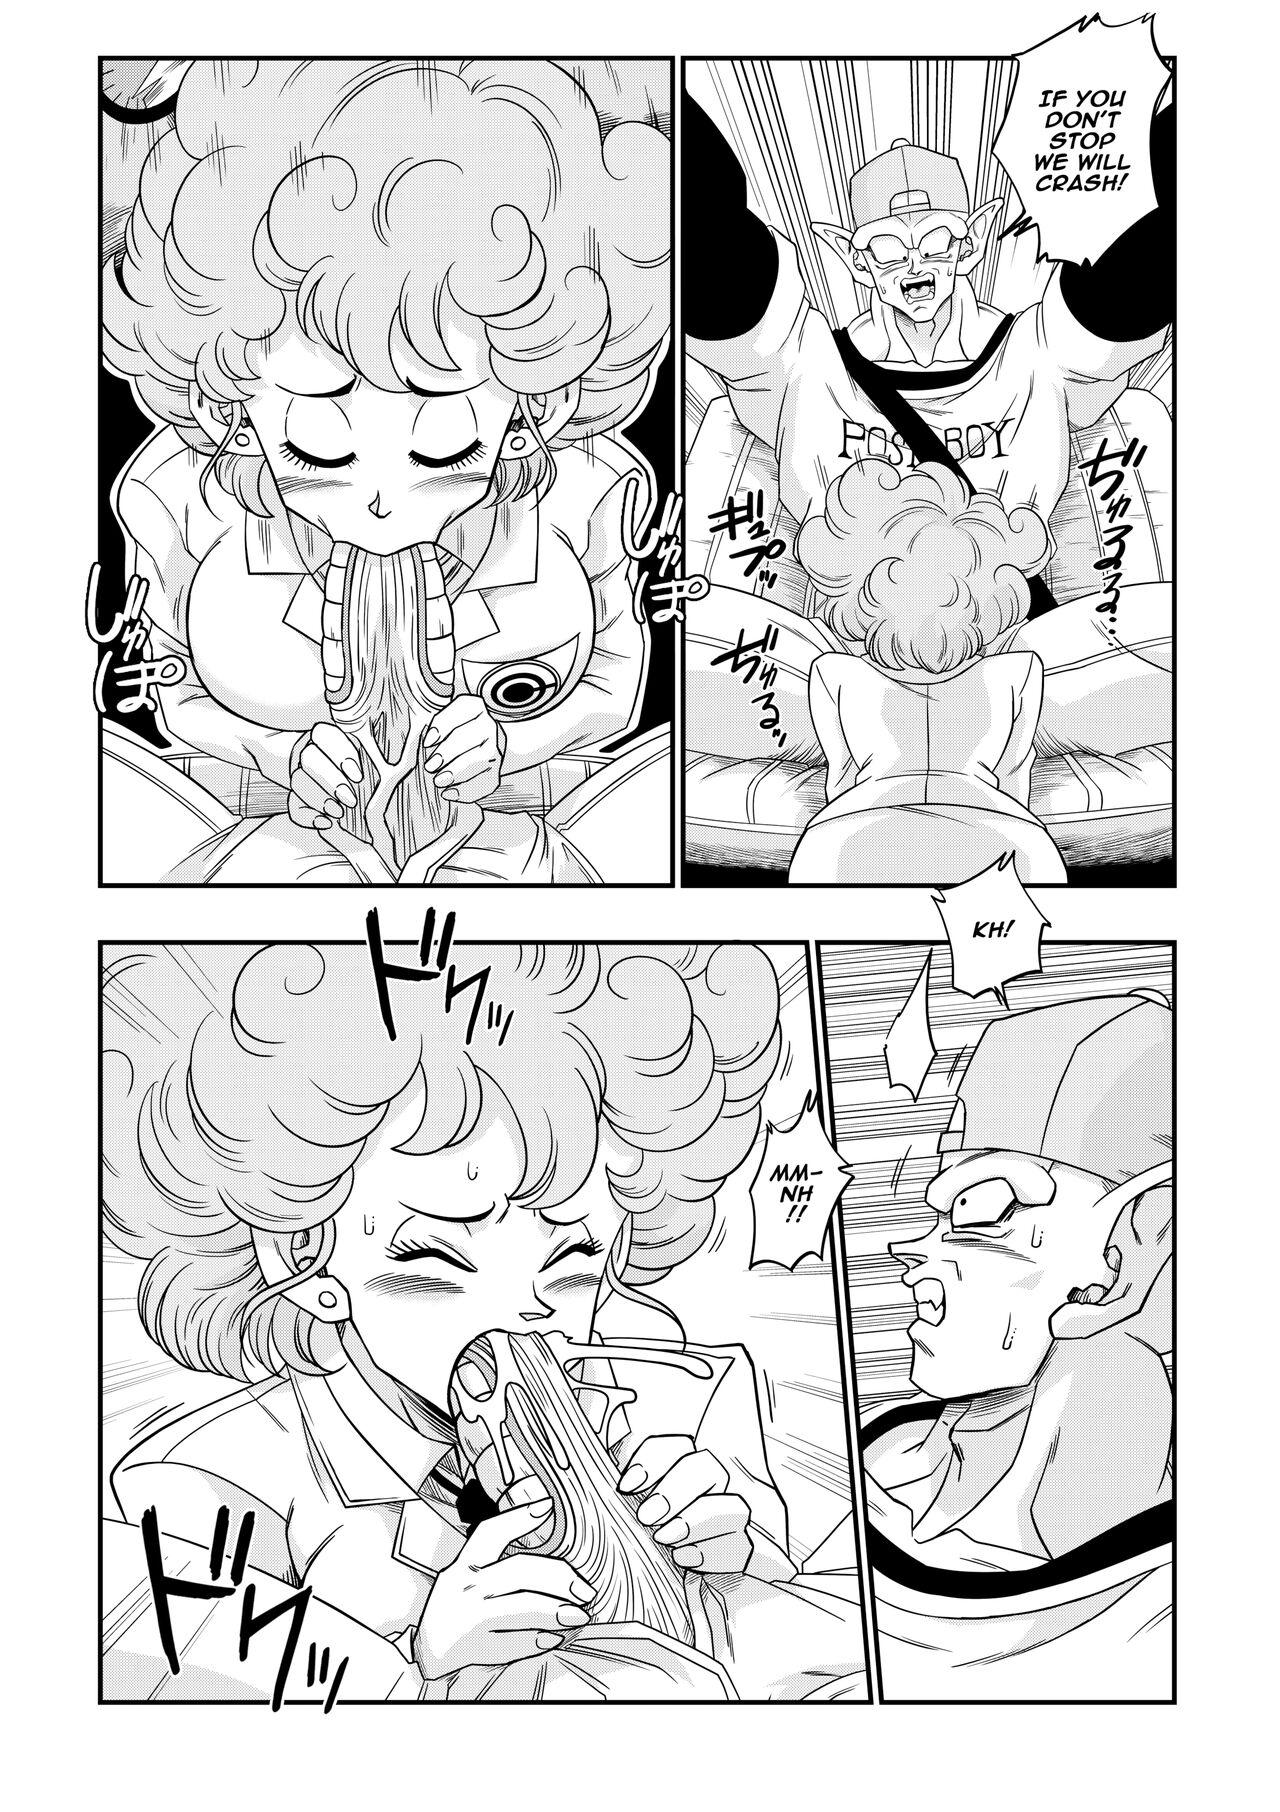 One Burning Road - Dragon ball z Dragon ball Gaygroupsex - Page 8